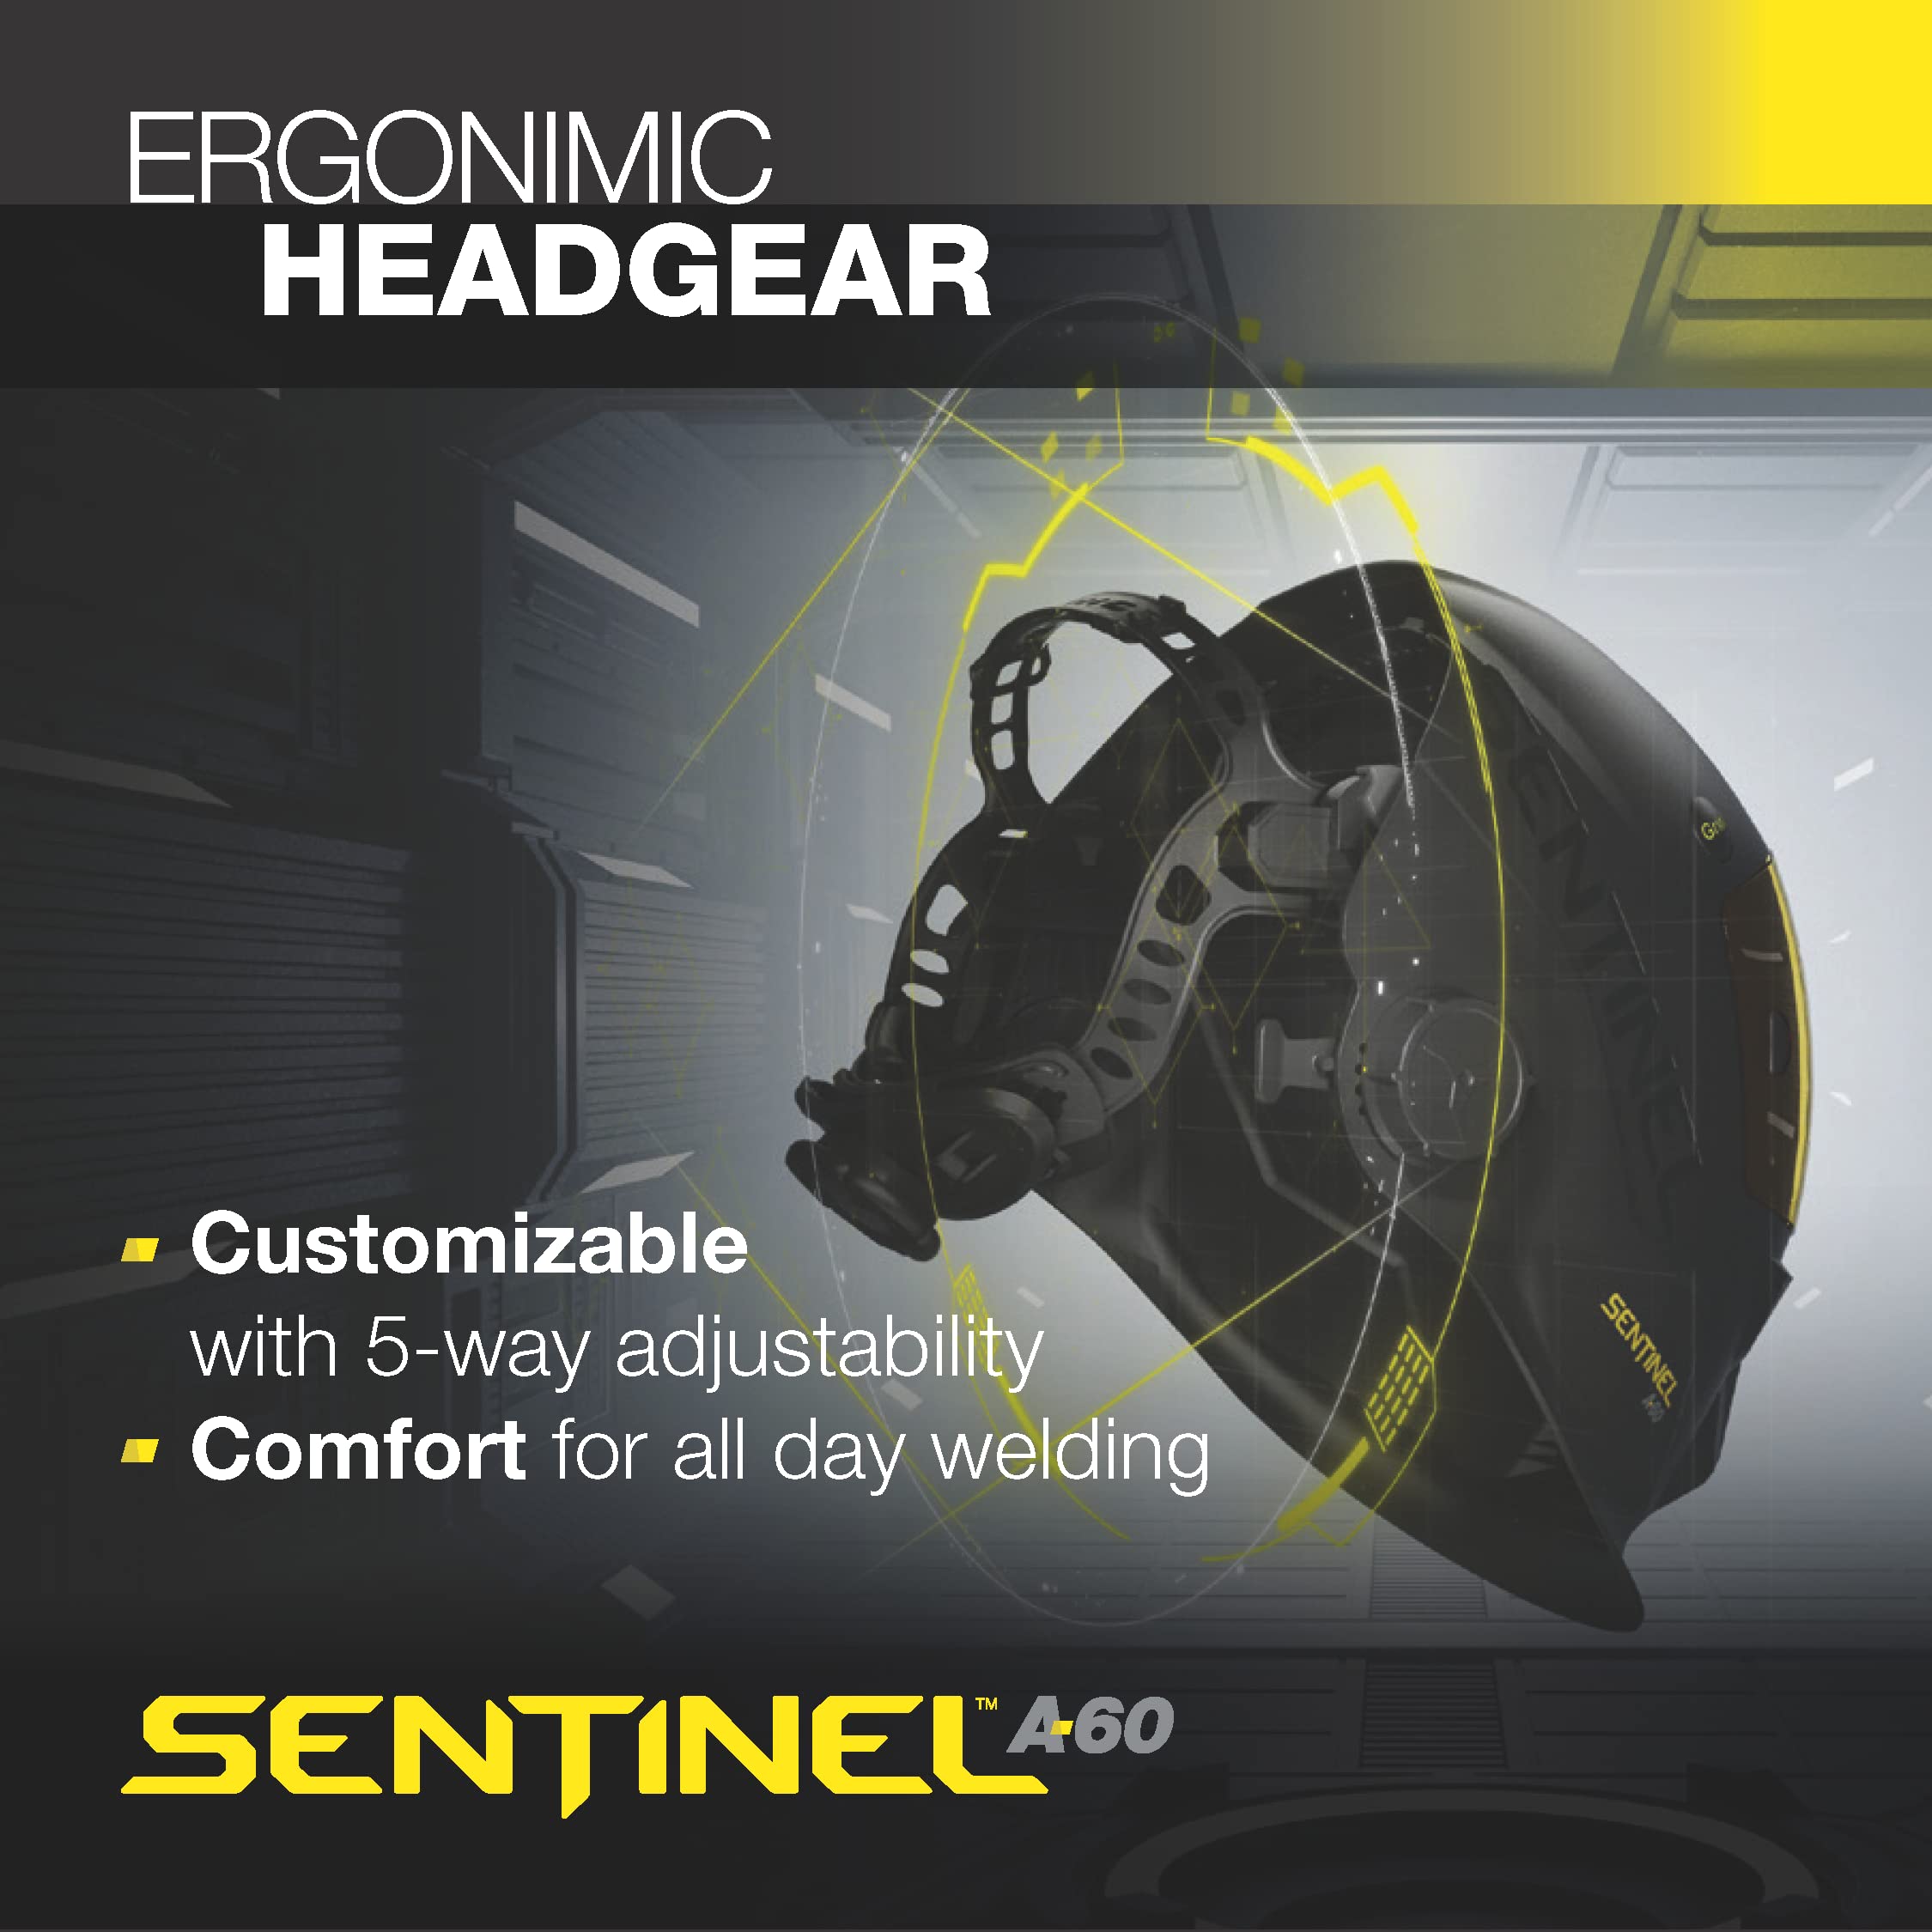 ESAB® Sentinel™ A60 Welding Helmet, Black Low-Profile Design, High Impact Resistance Nylon, Large Viewing Area 4.65 in x 2.80 in